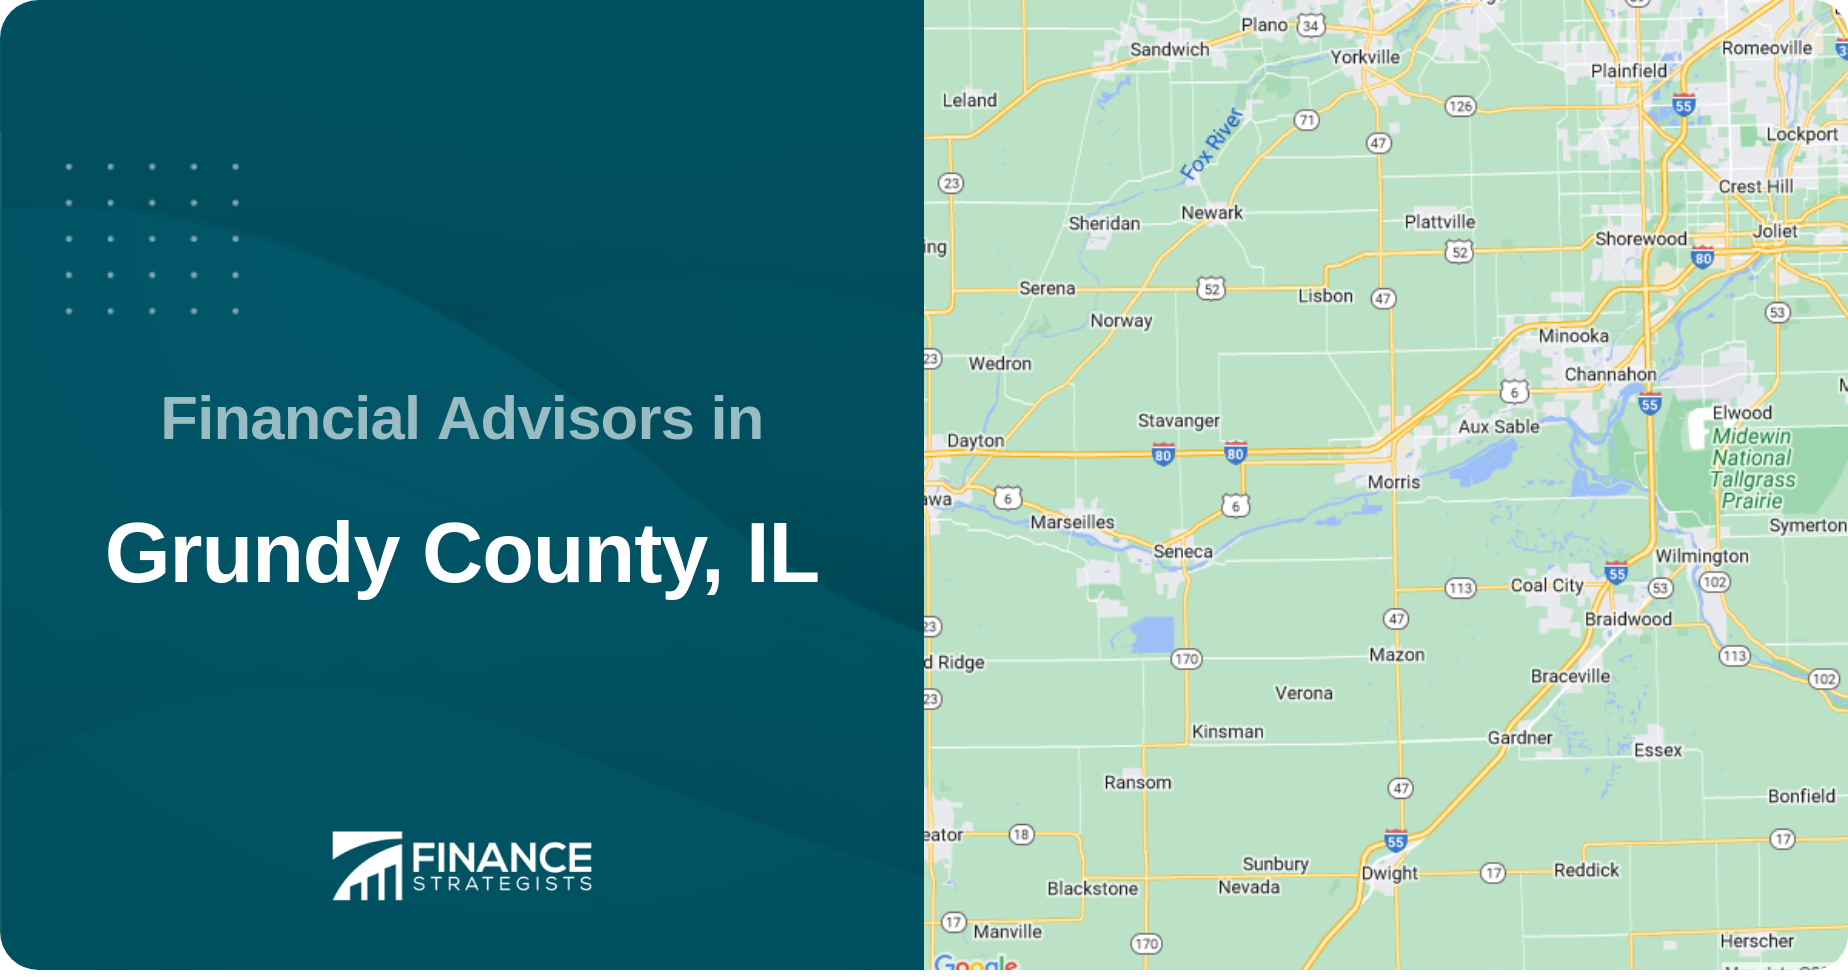 Financial Advisors in Grundy County, IL